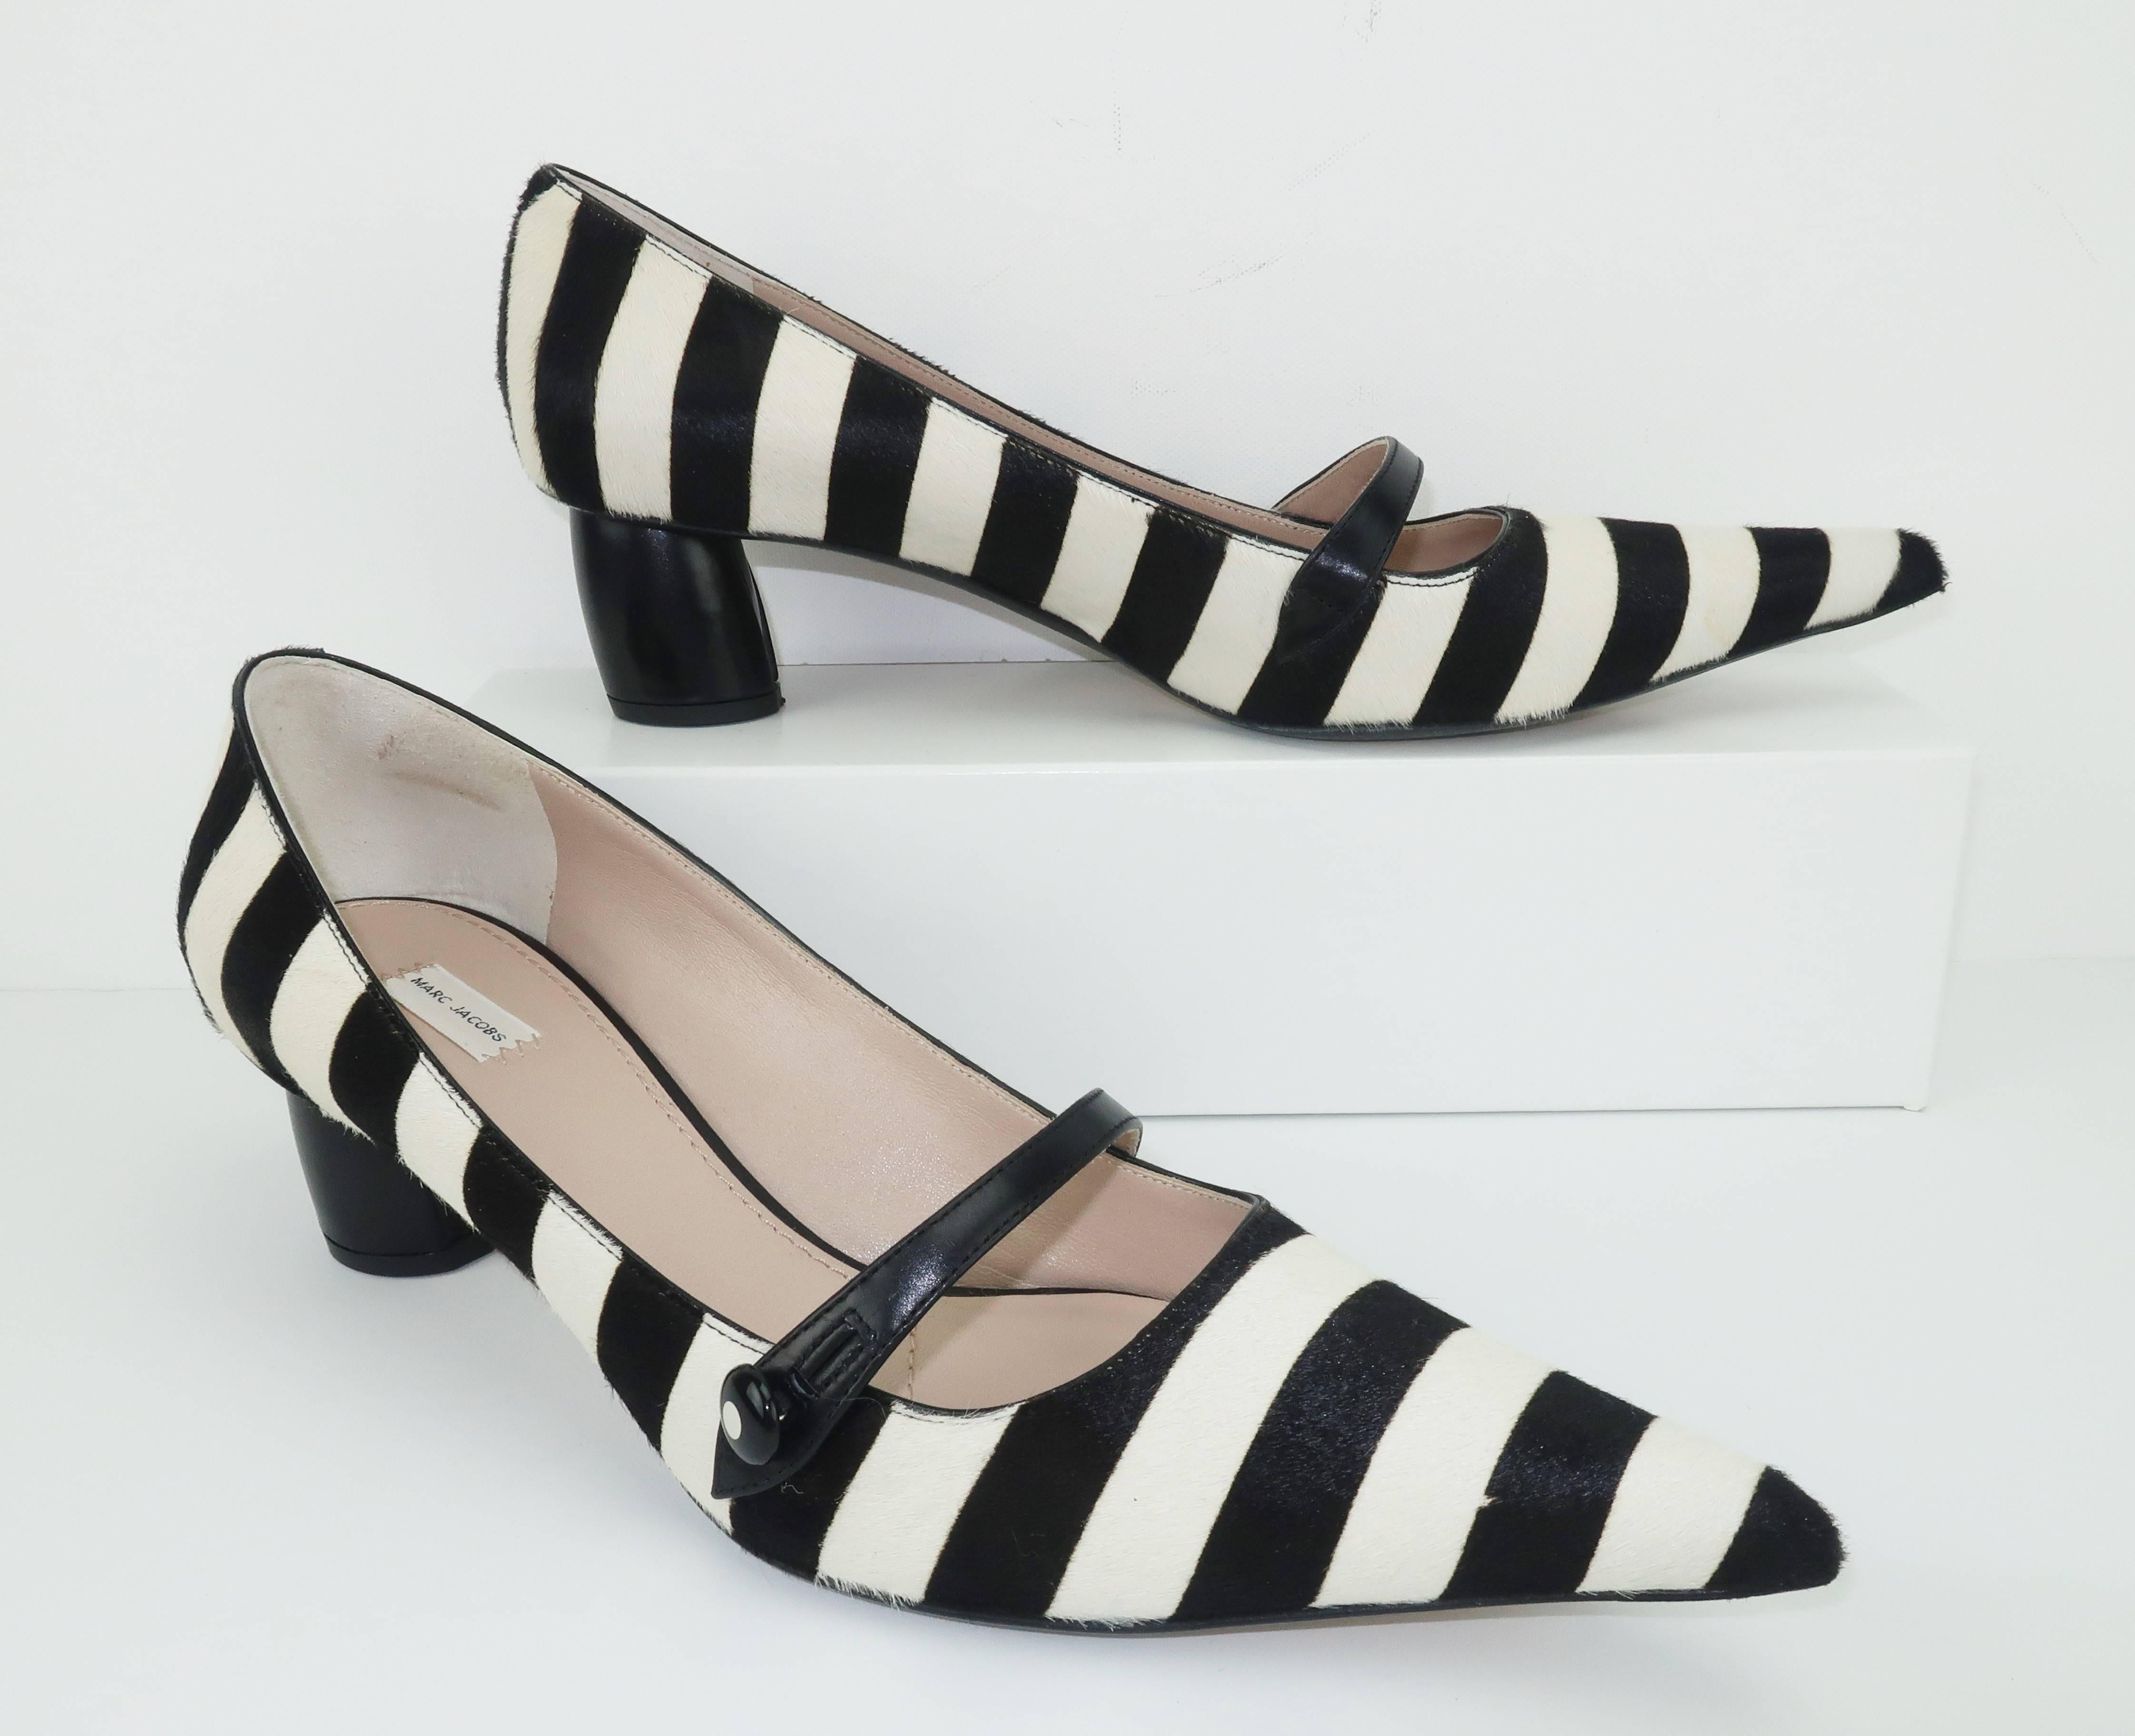 These contemporary Marc Jacobs shoes are a fabulous ‘witchiepoo’ Mary Jane silhouette with exaggerated pointy toes.  Fabricated from black and white striped pony with black calf straps and covered cylindrical kitten heel which measures a 